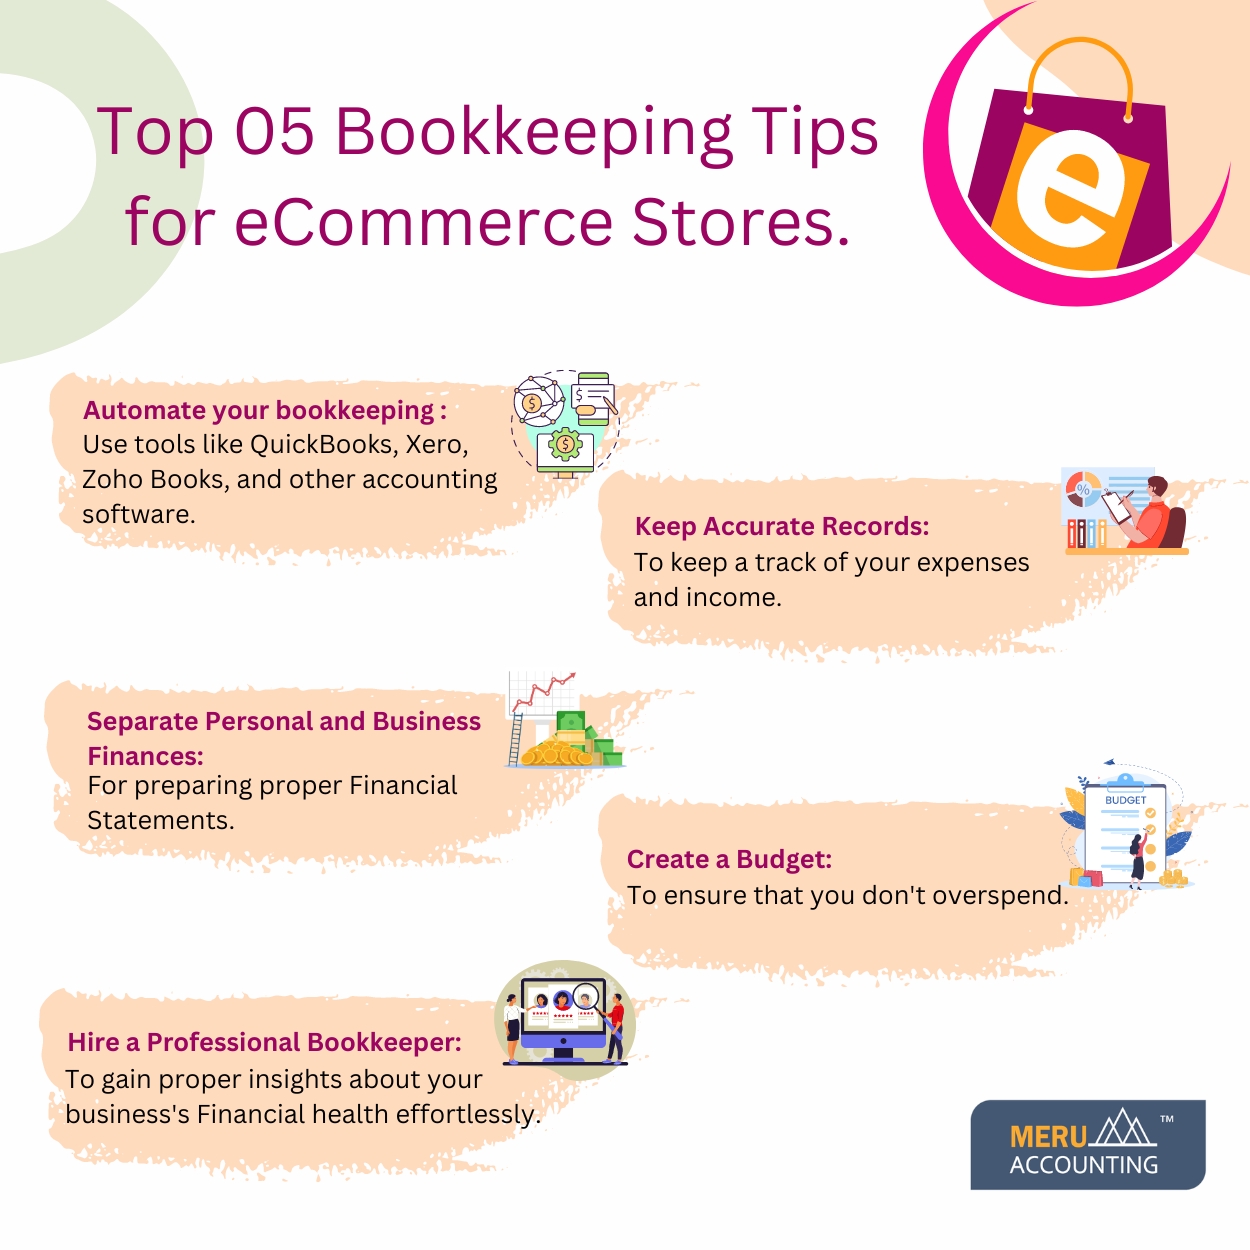 Top 05 Bookkeeping Tips for eCommerce Stores size 1250 by 1250 v1